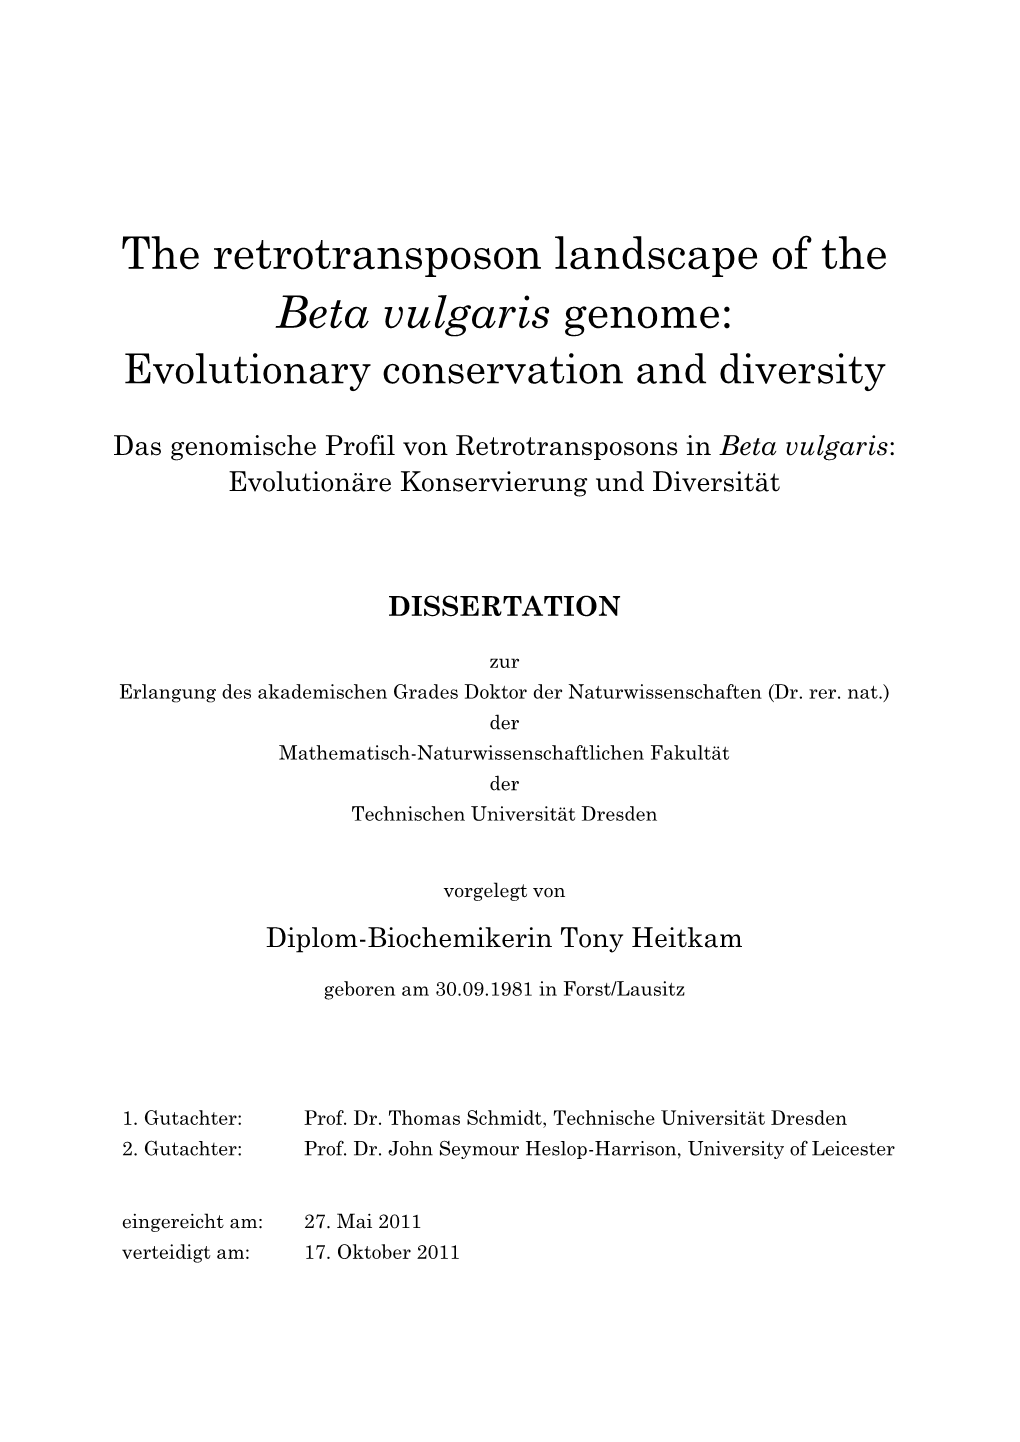 The Retrotransposon Landscape of the Beta Vulgaris Genome: Evolutionary Conservation and Diversity